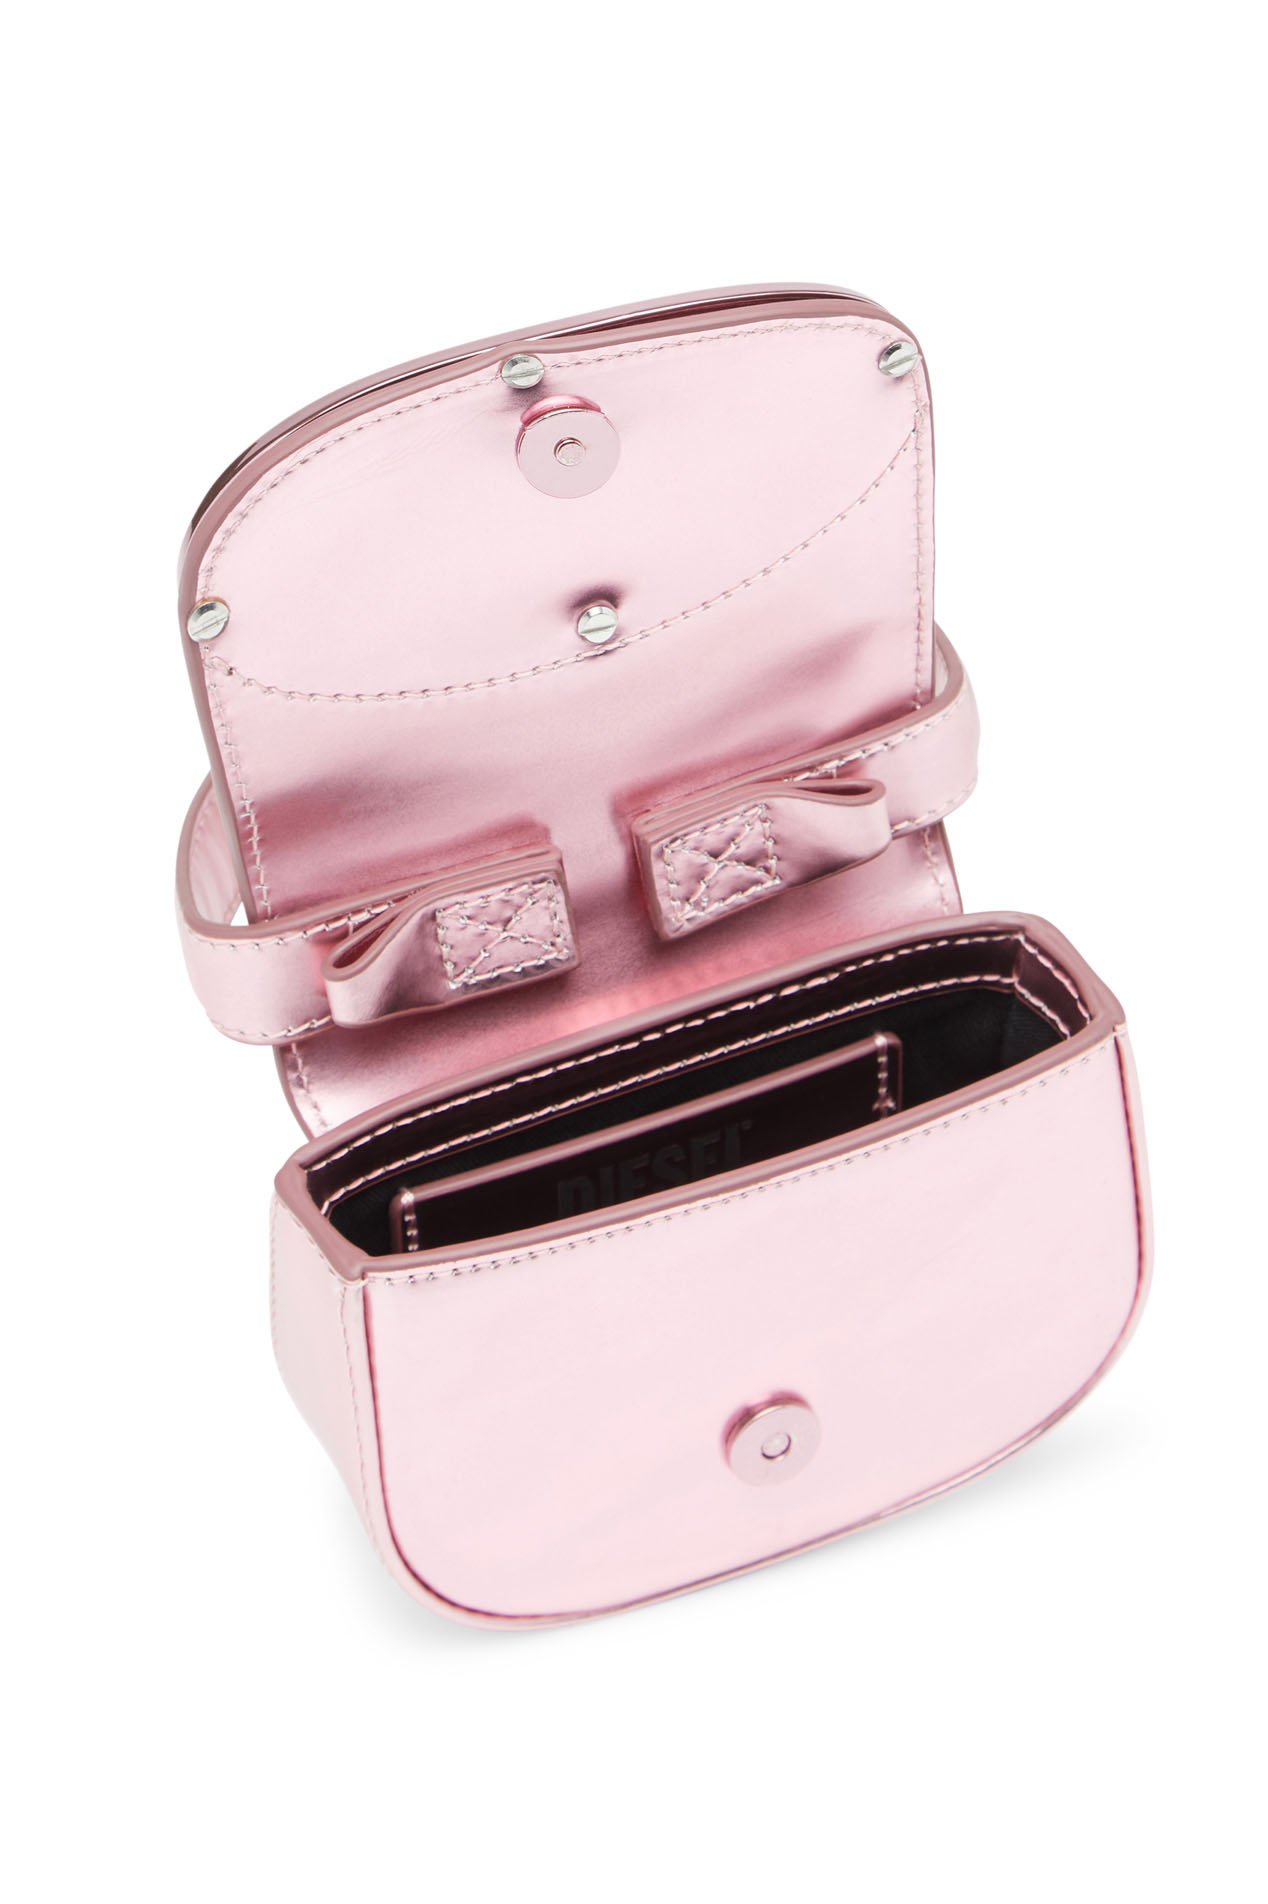 Diesel - 1DR-XS-S, Female 1DR-XS-S-Iconic mini bag in mirrored leather in Pink - Image 4